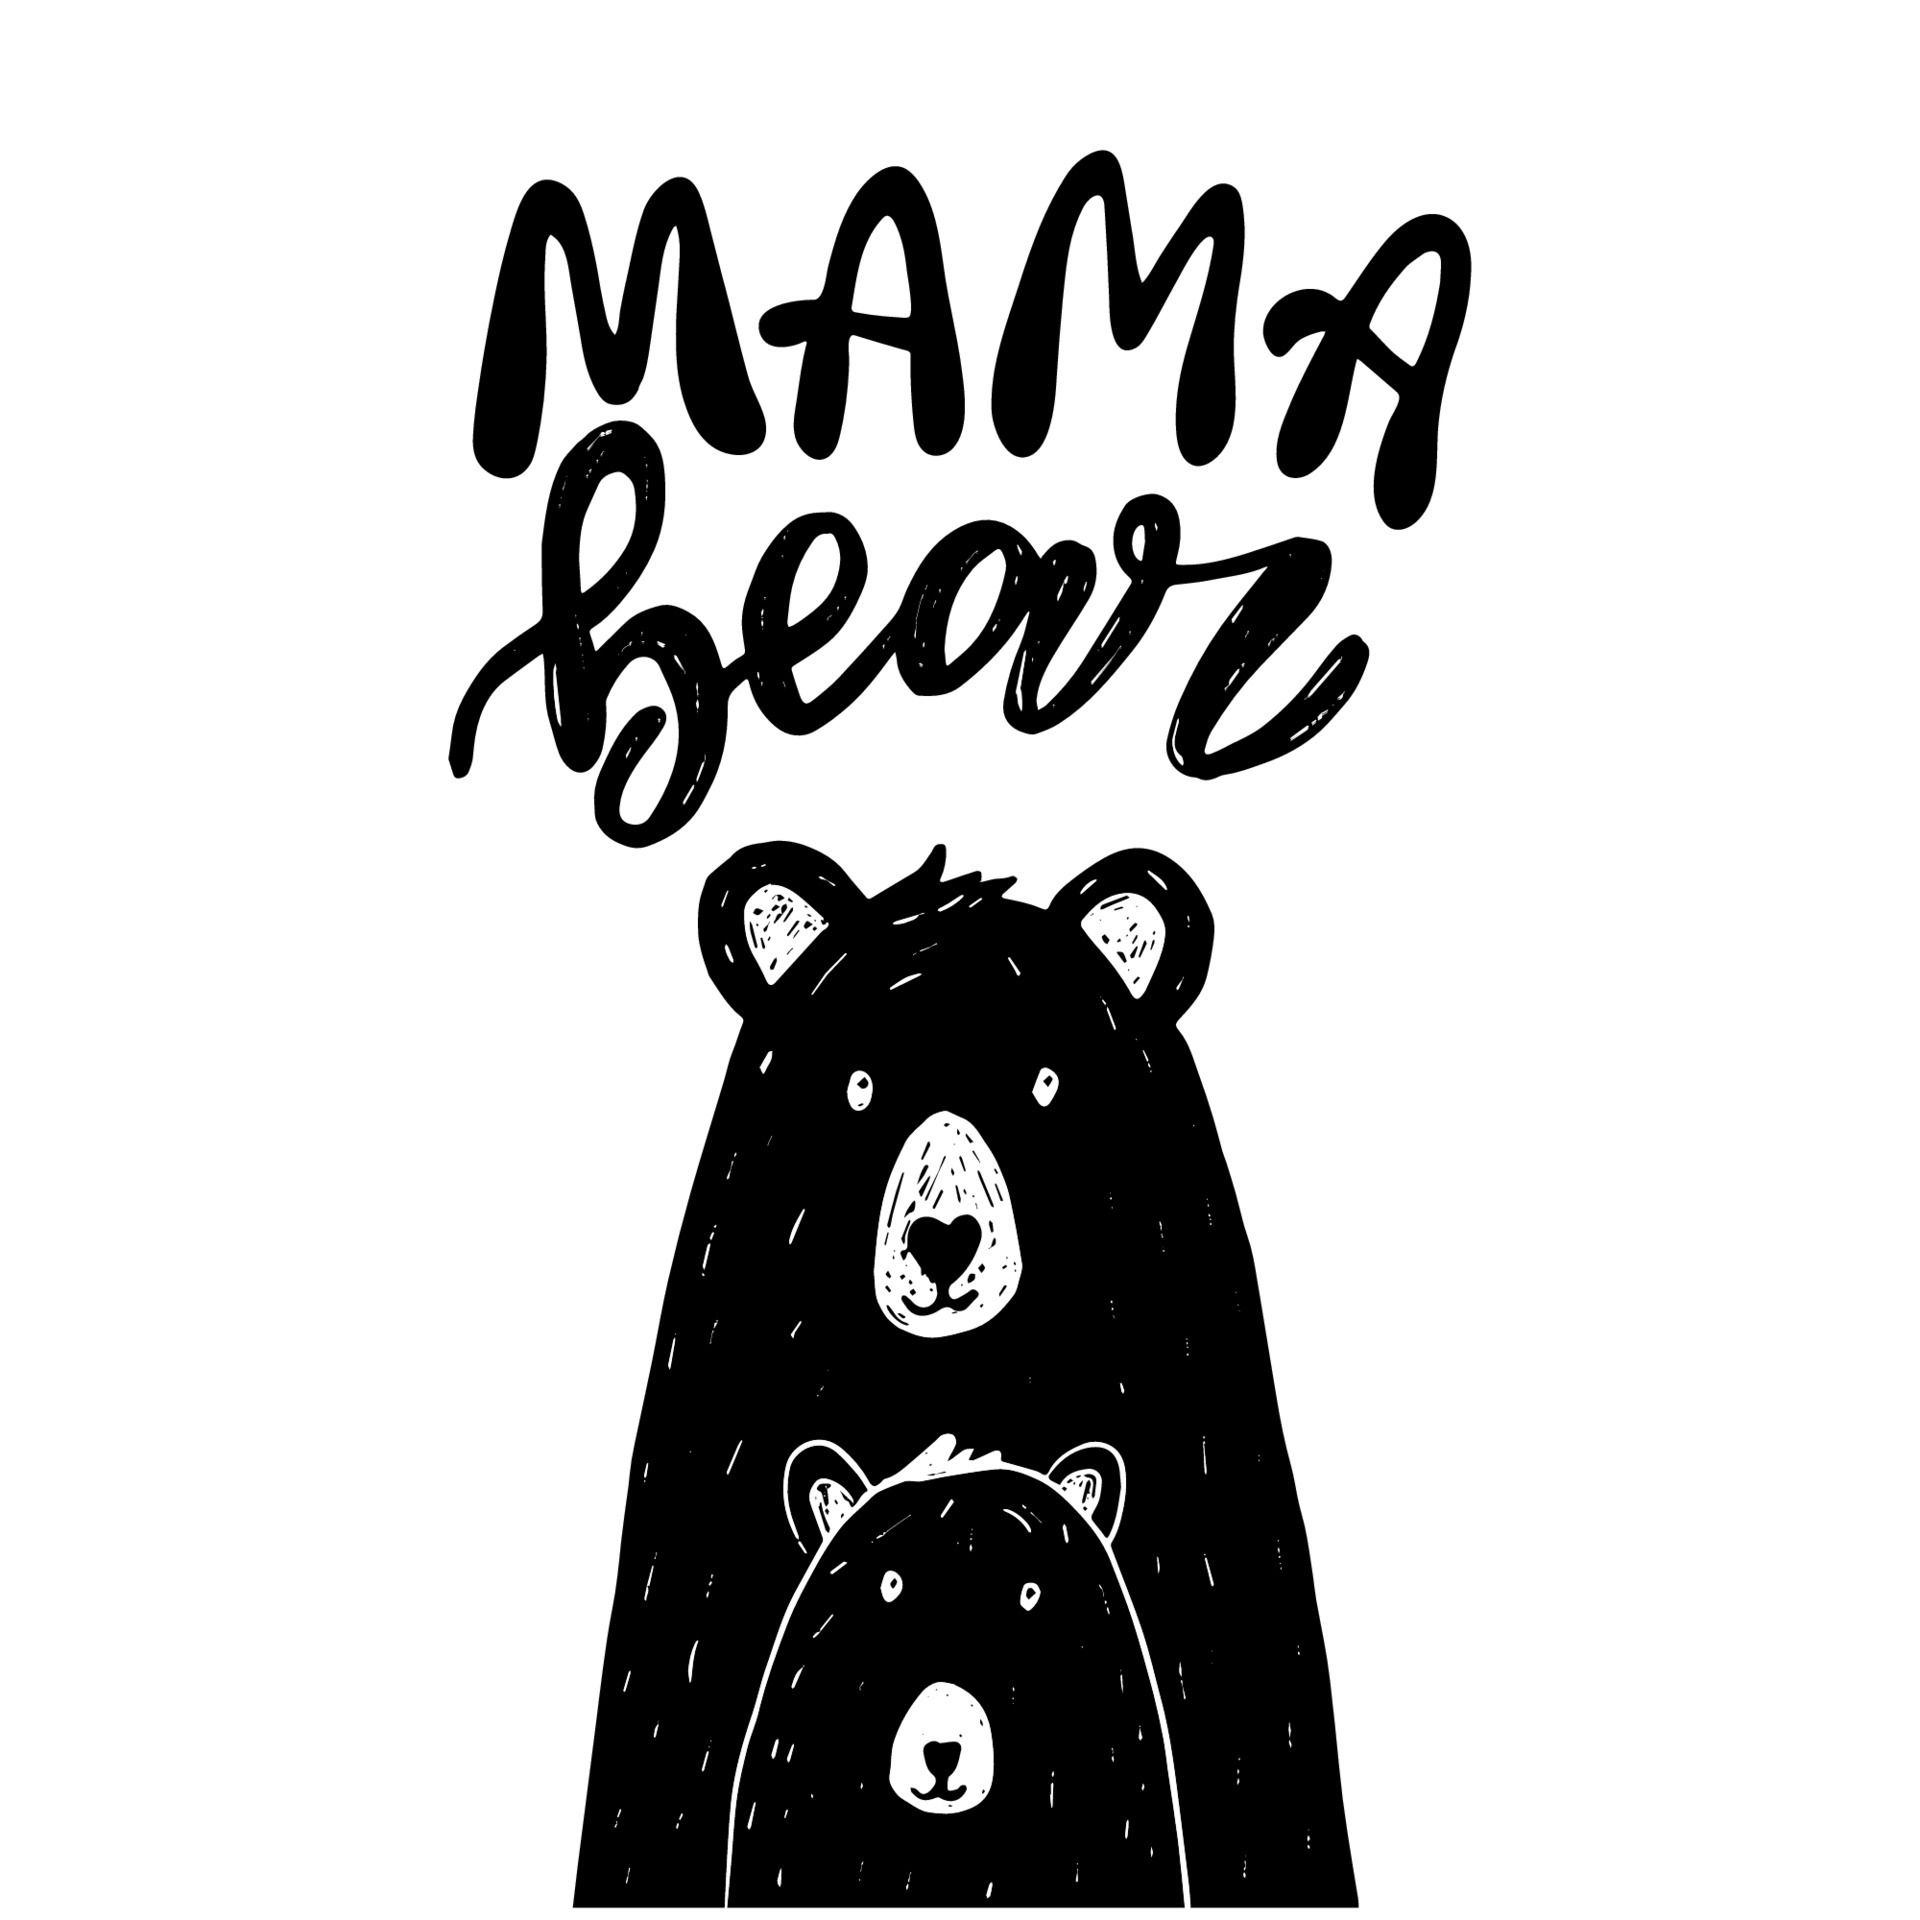 Premium Vector  Dont test me i will go mama bear on you lettering mama  premium vector design